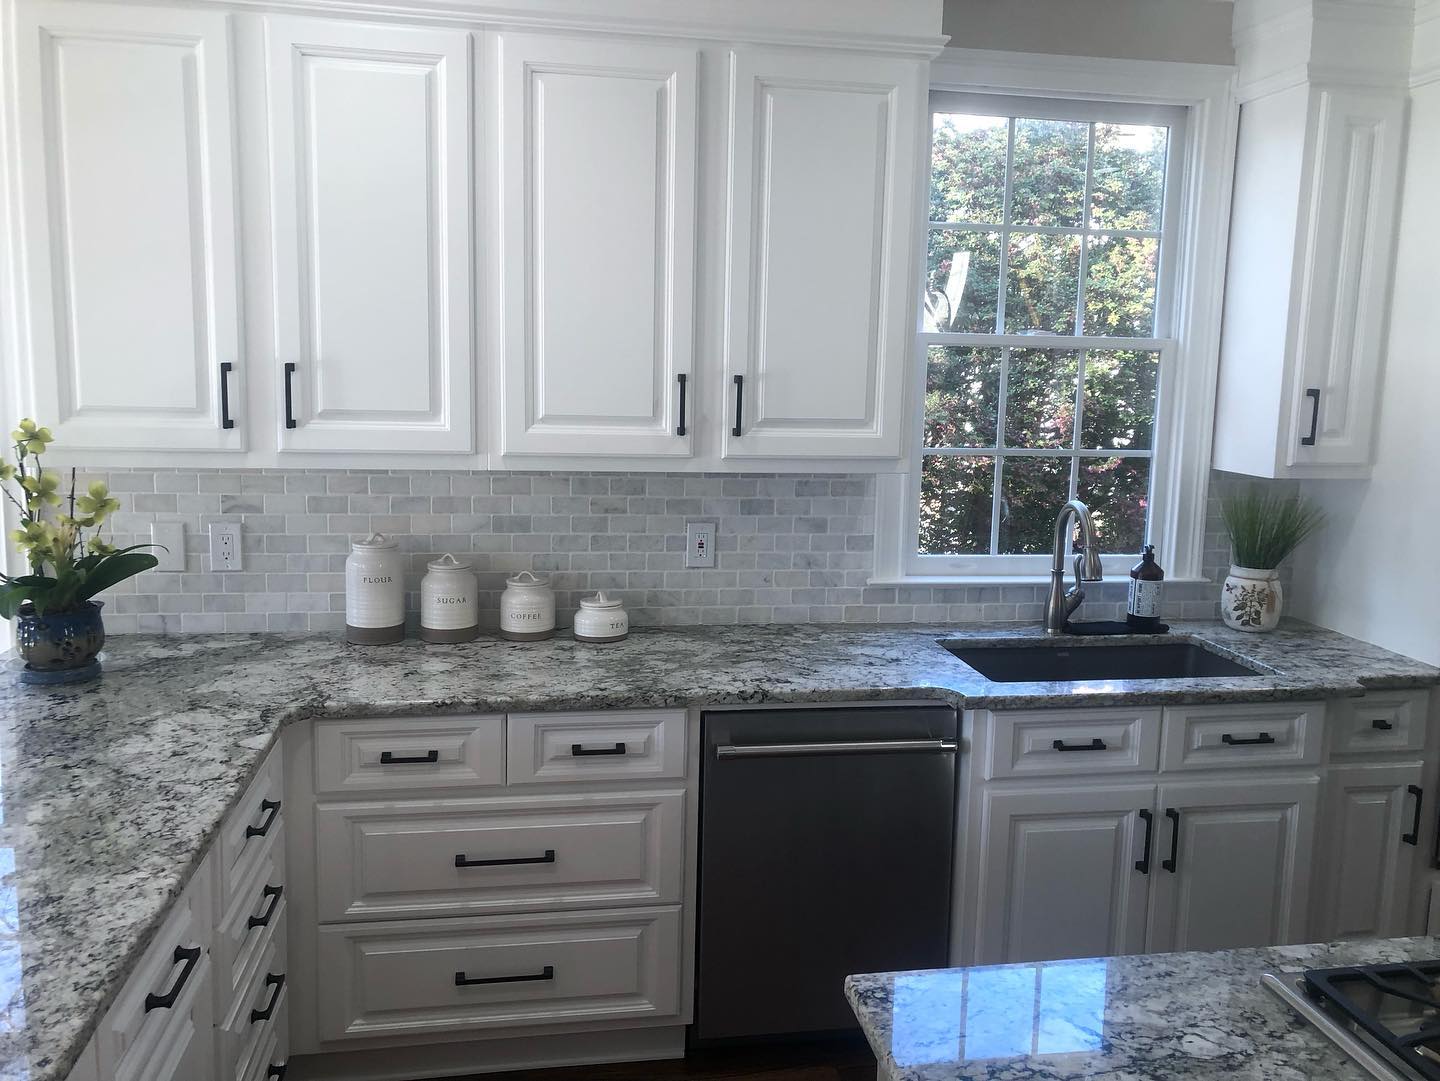 Complete Kitchen Remodeling with Crown Molding and Corbels 1